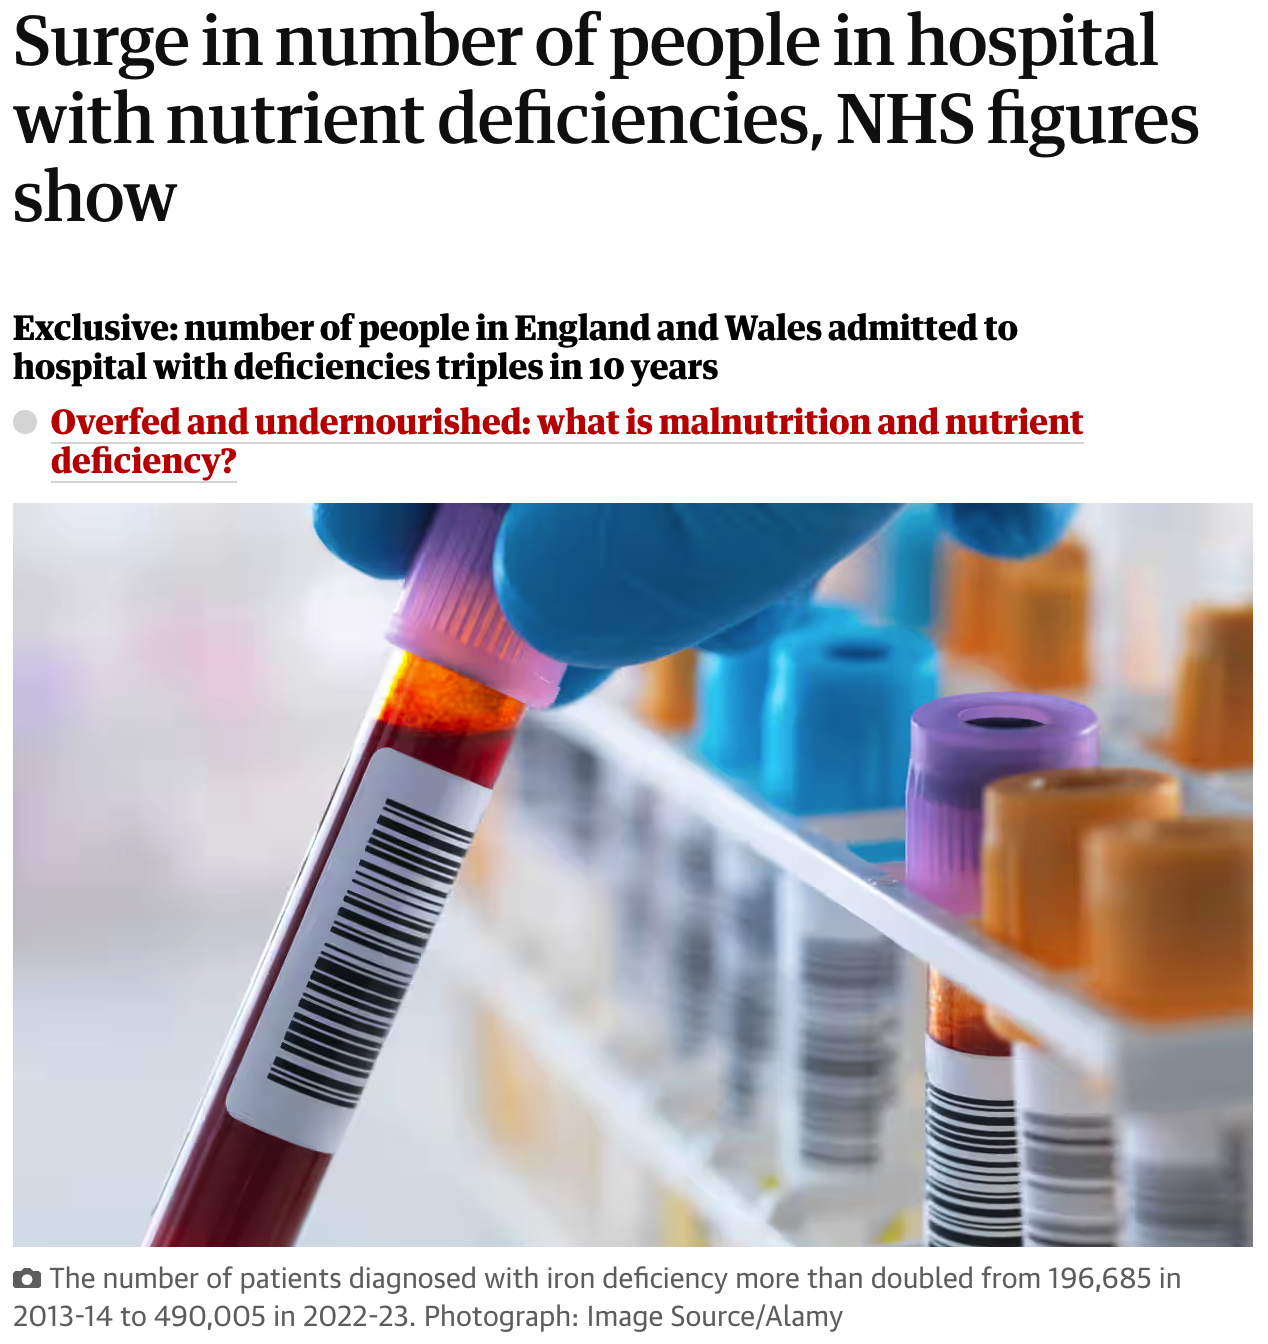 The Nutrient Deficiency Crisis in the UK: The Vital Role of Nutrition